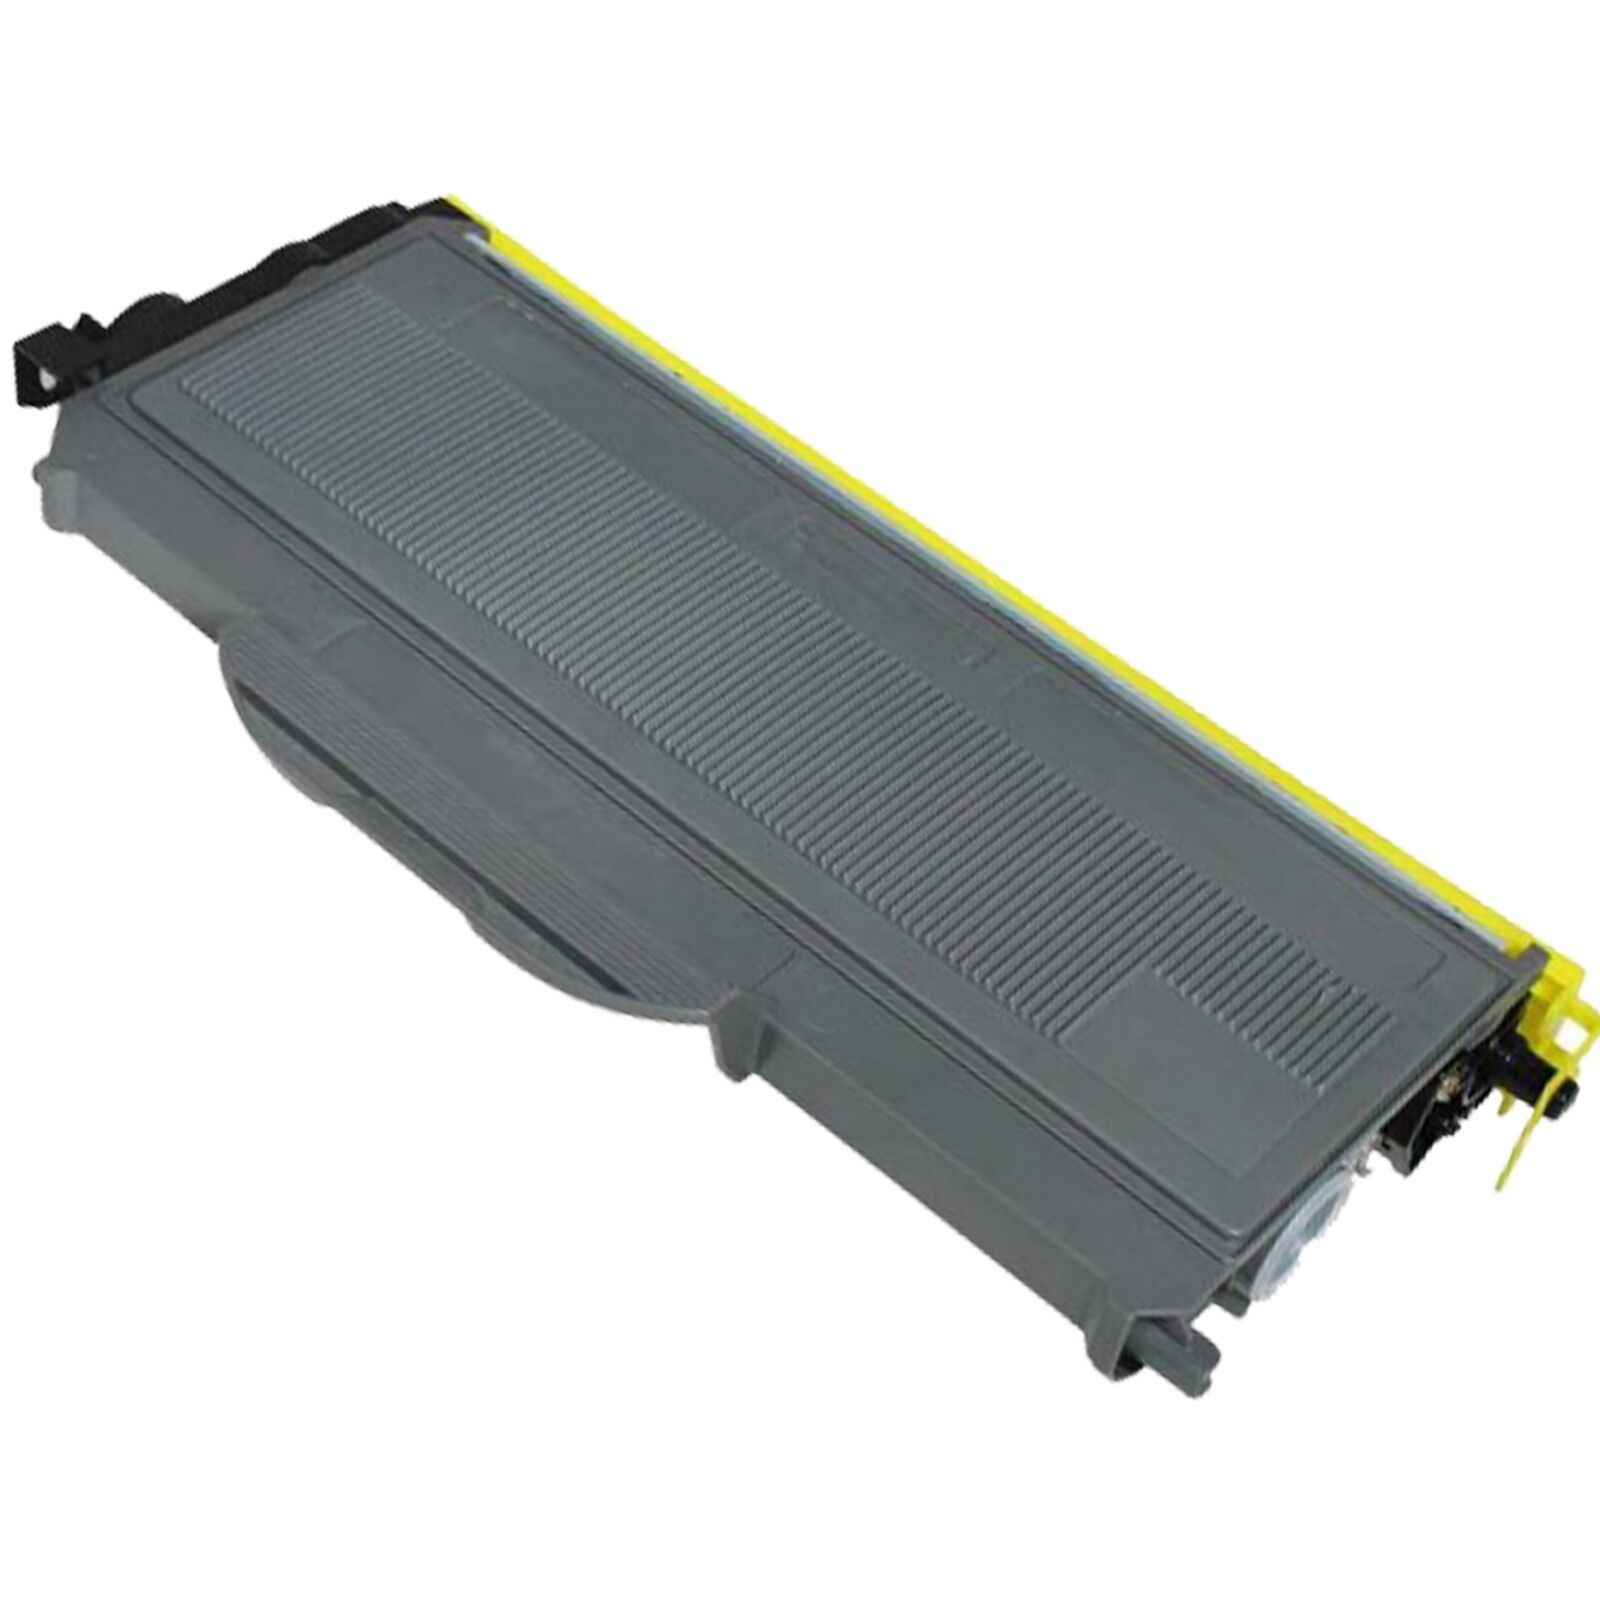 New TN-360 Toner Cartridge  fits Brother DCP-7030 DCP-7040 DCP-7045N TN360